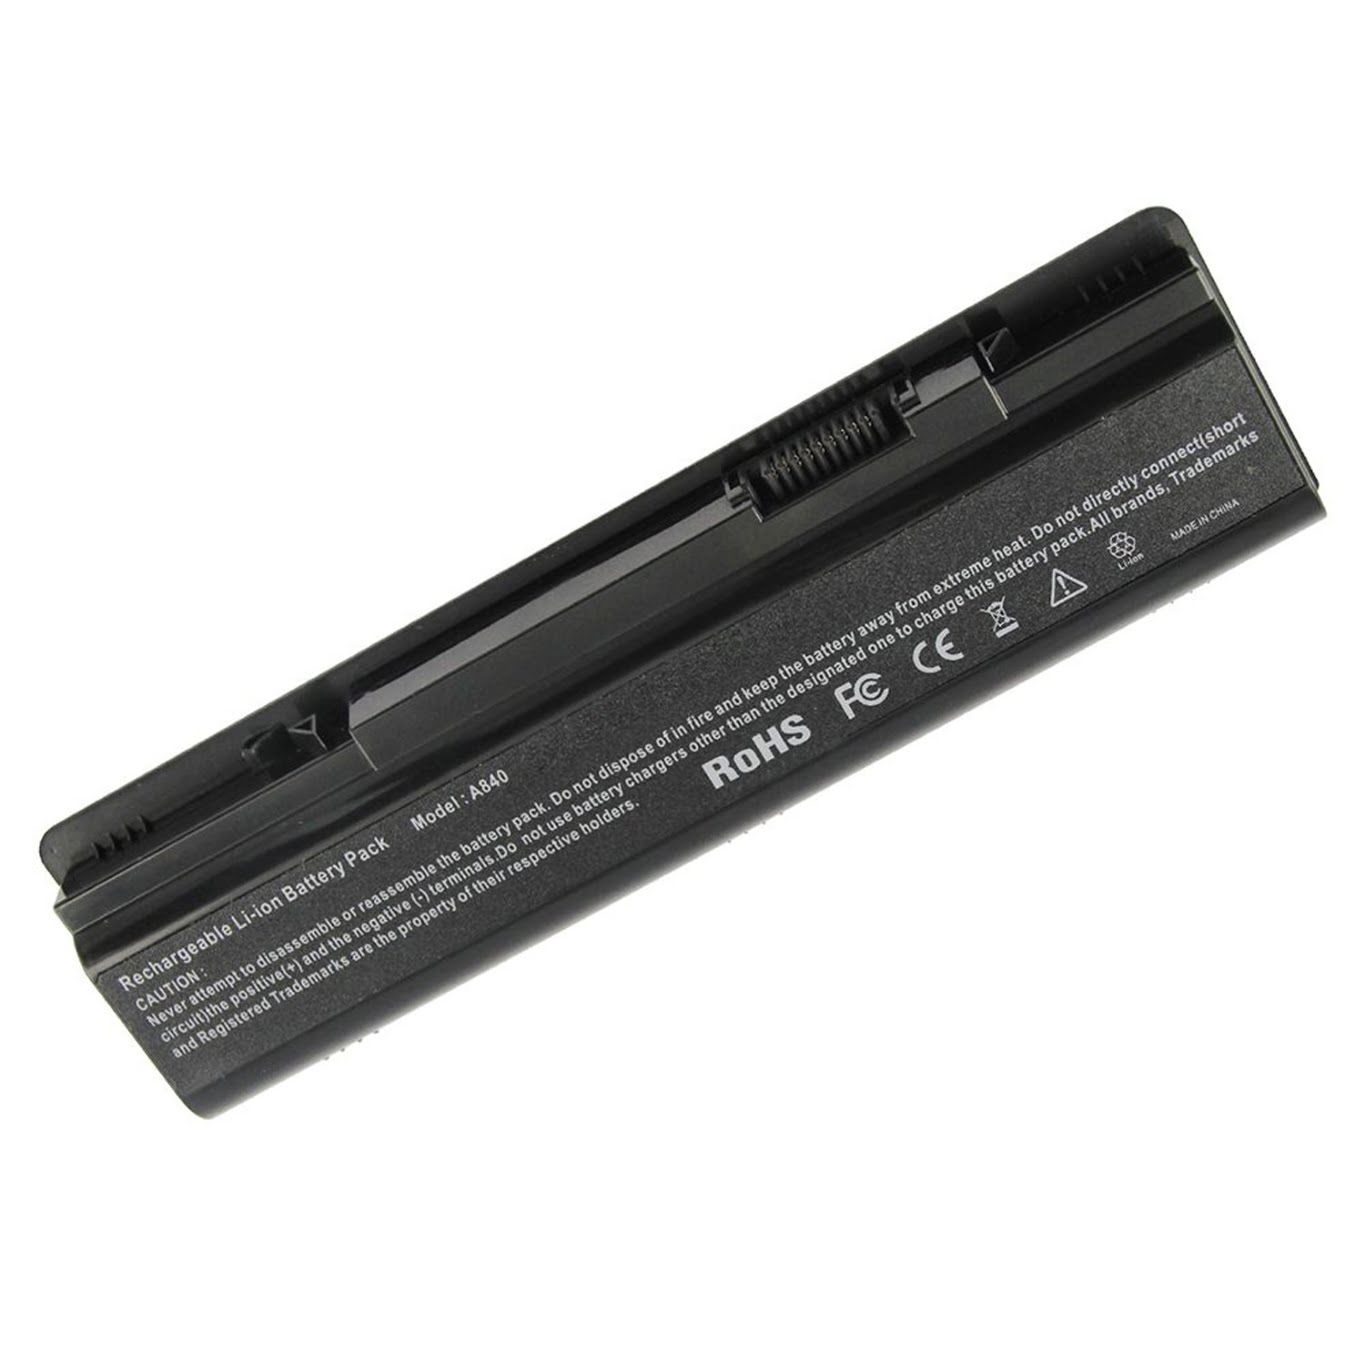 0F287H, 0R988H replacement Laptop Battery for Dell Inspiron 1410, V1014, 6 cells, 11.1V, 4400mAh